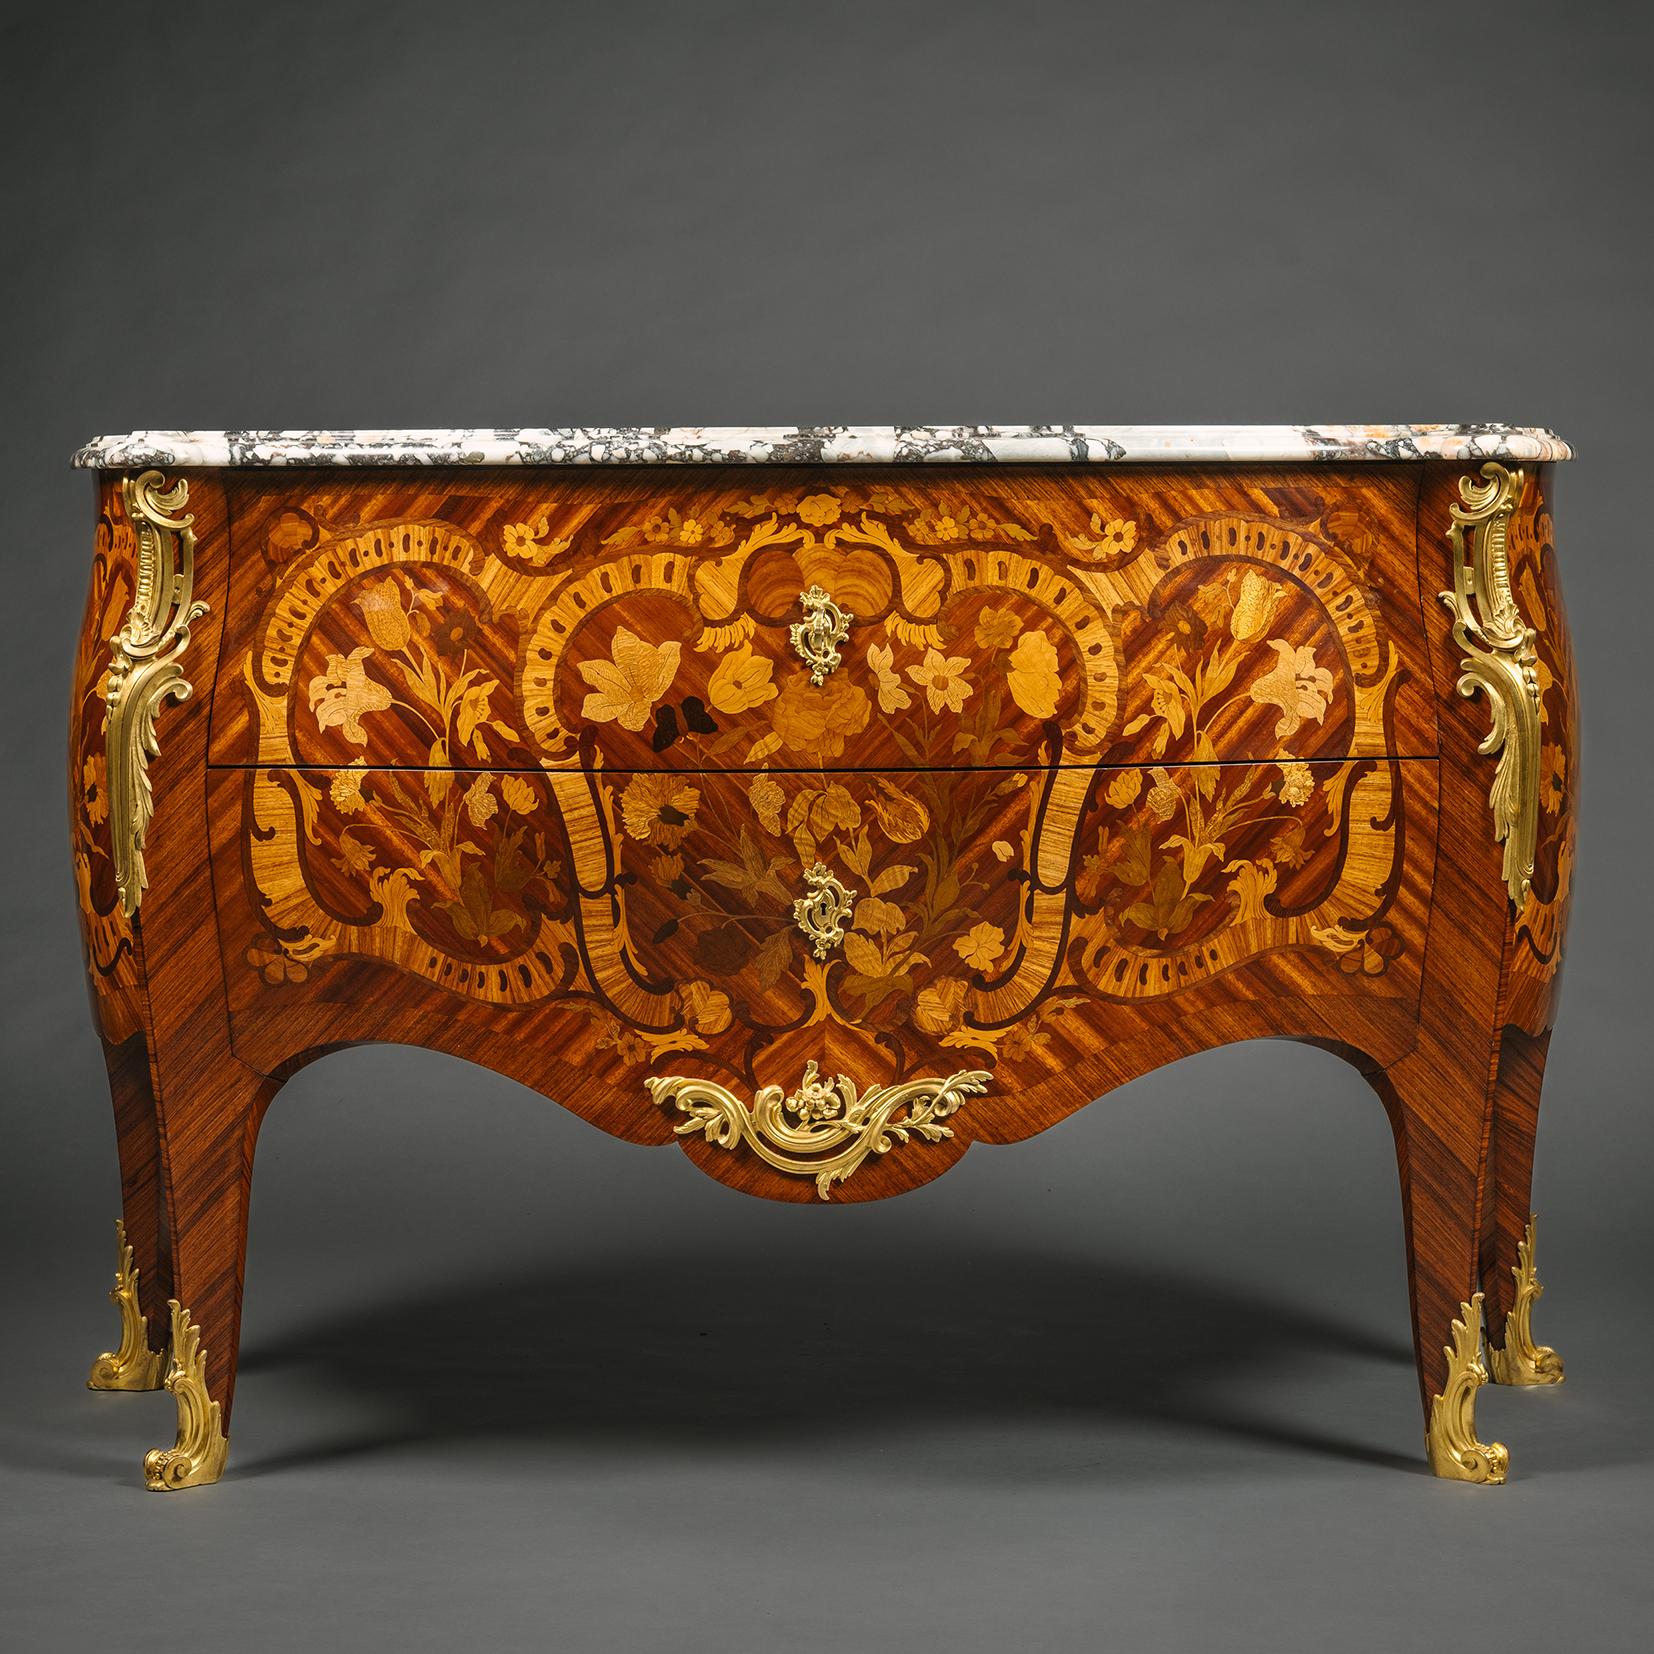 A Fine Louis XV Style Gilt-Bronze Mounted Marquetry Commode, By Paul Sormani, Paris. 

The finely proportioned bombé-shaped commode is veneered with floral marquetry in precious timbers. The original grey veined brêche marble top has a serpentine